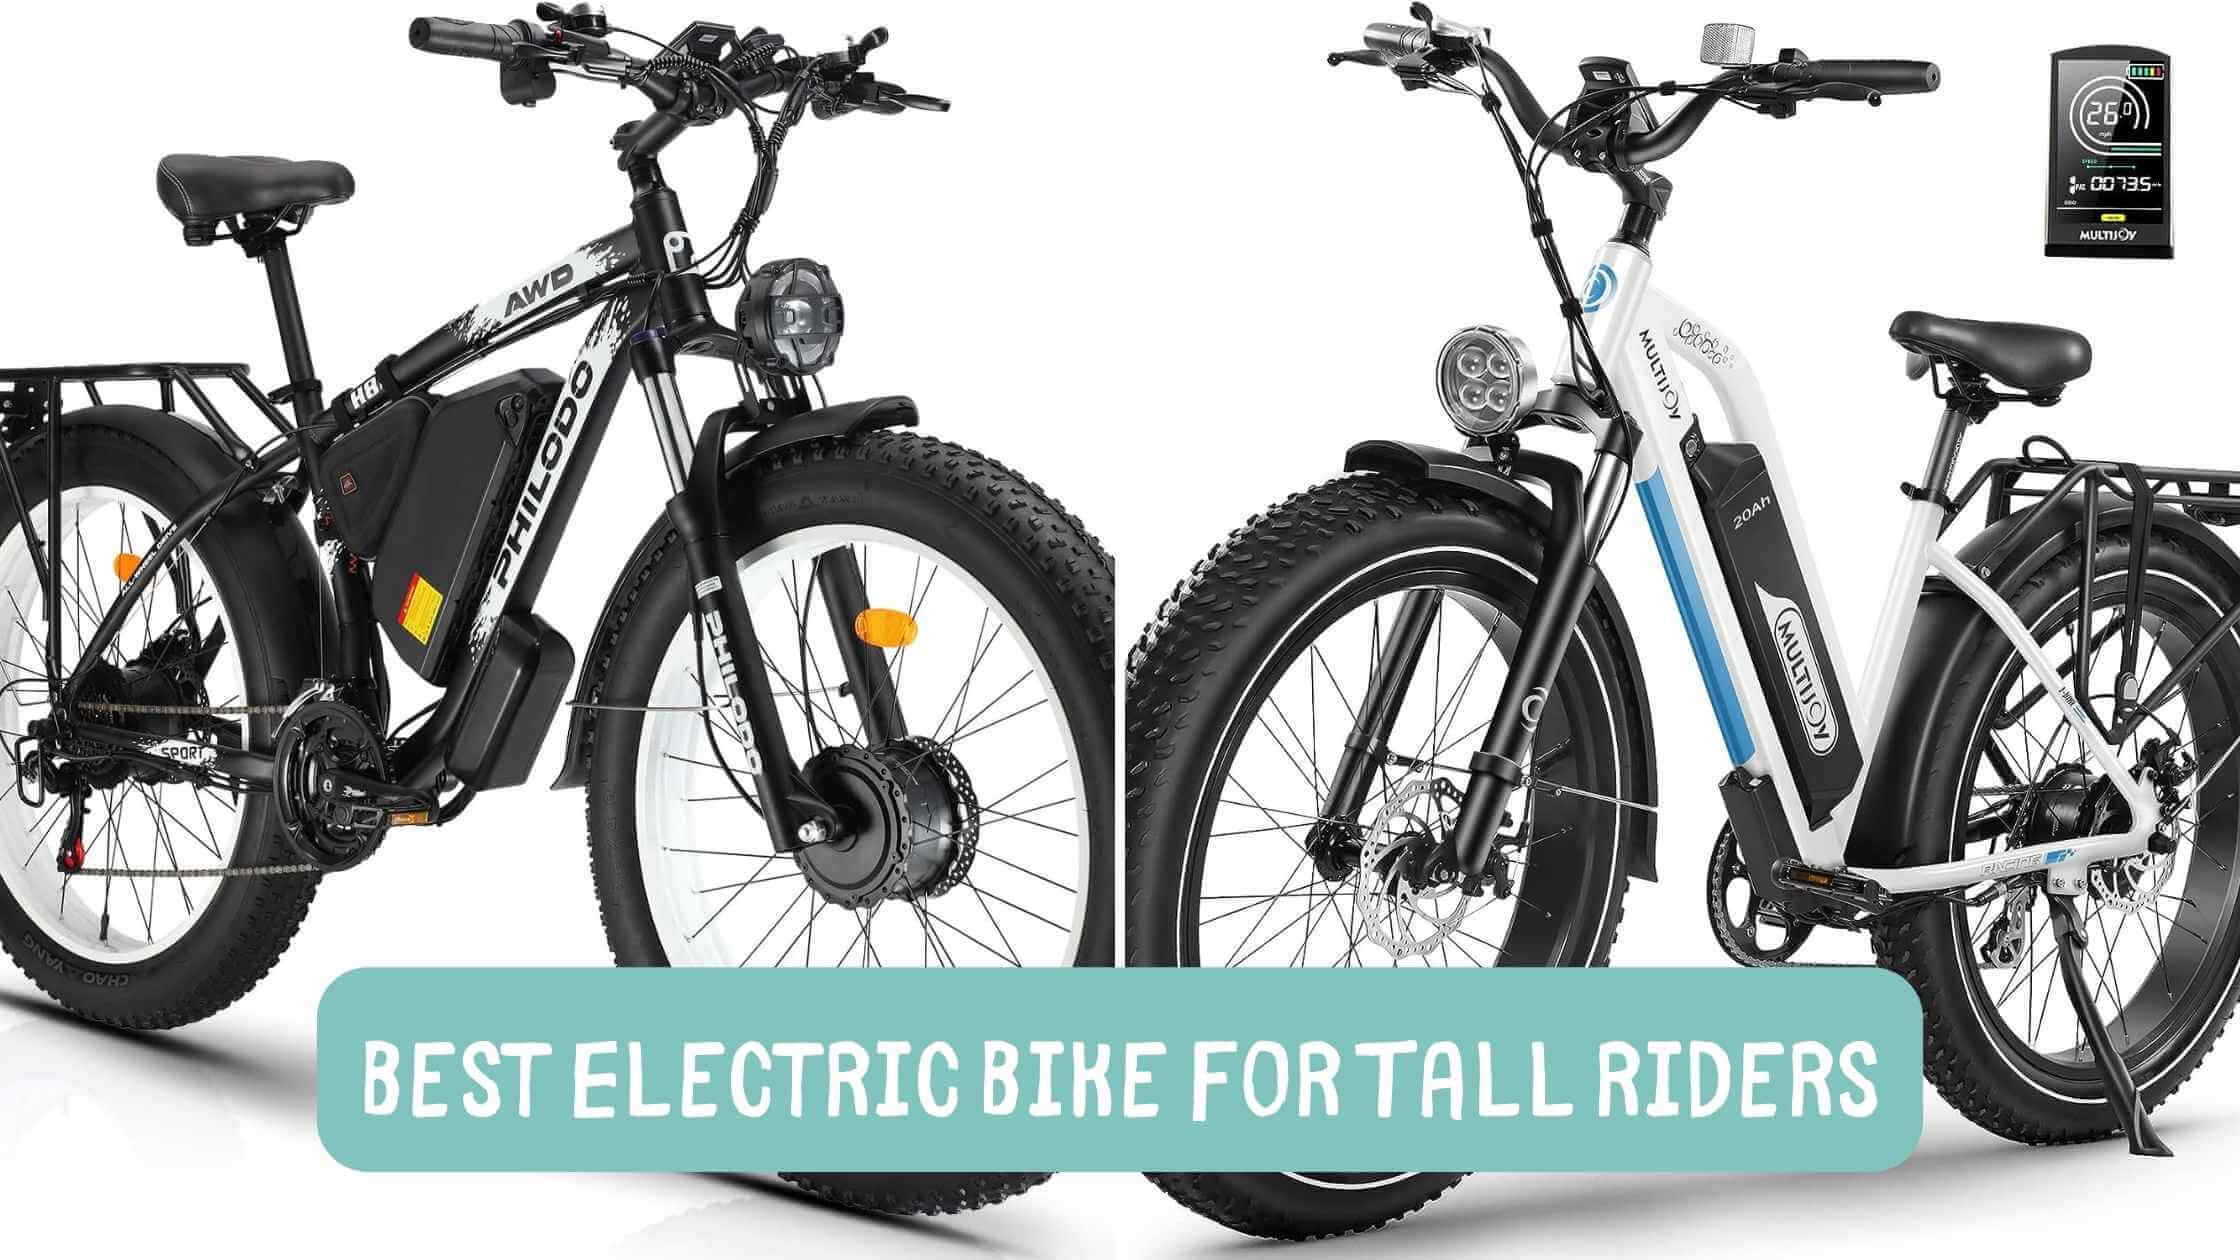 Best Electric Bike for Tall Riders